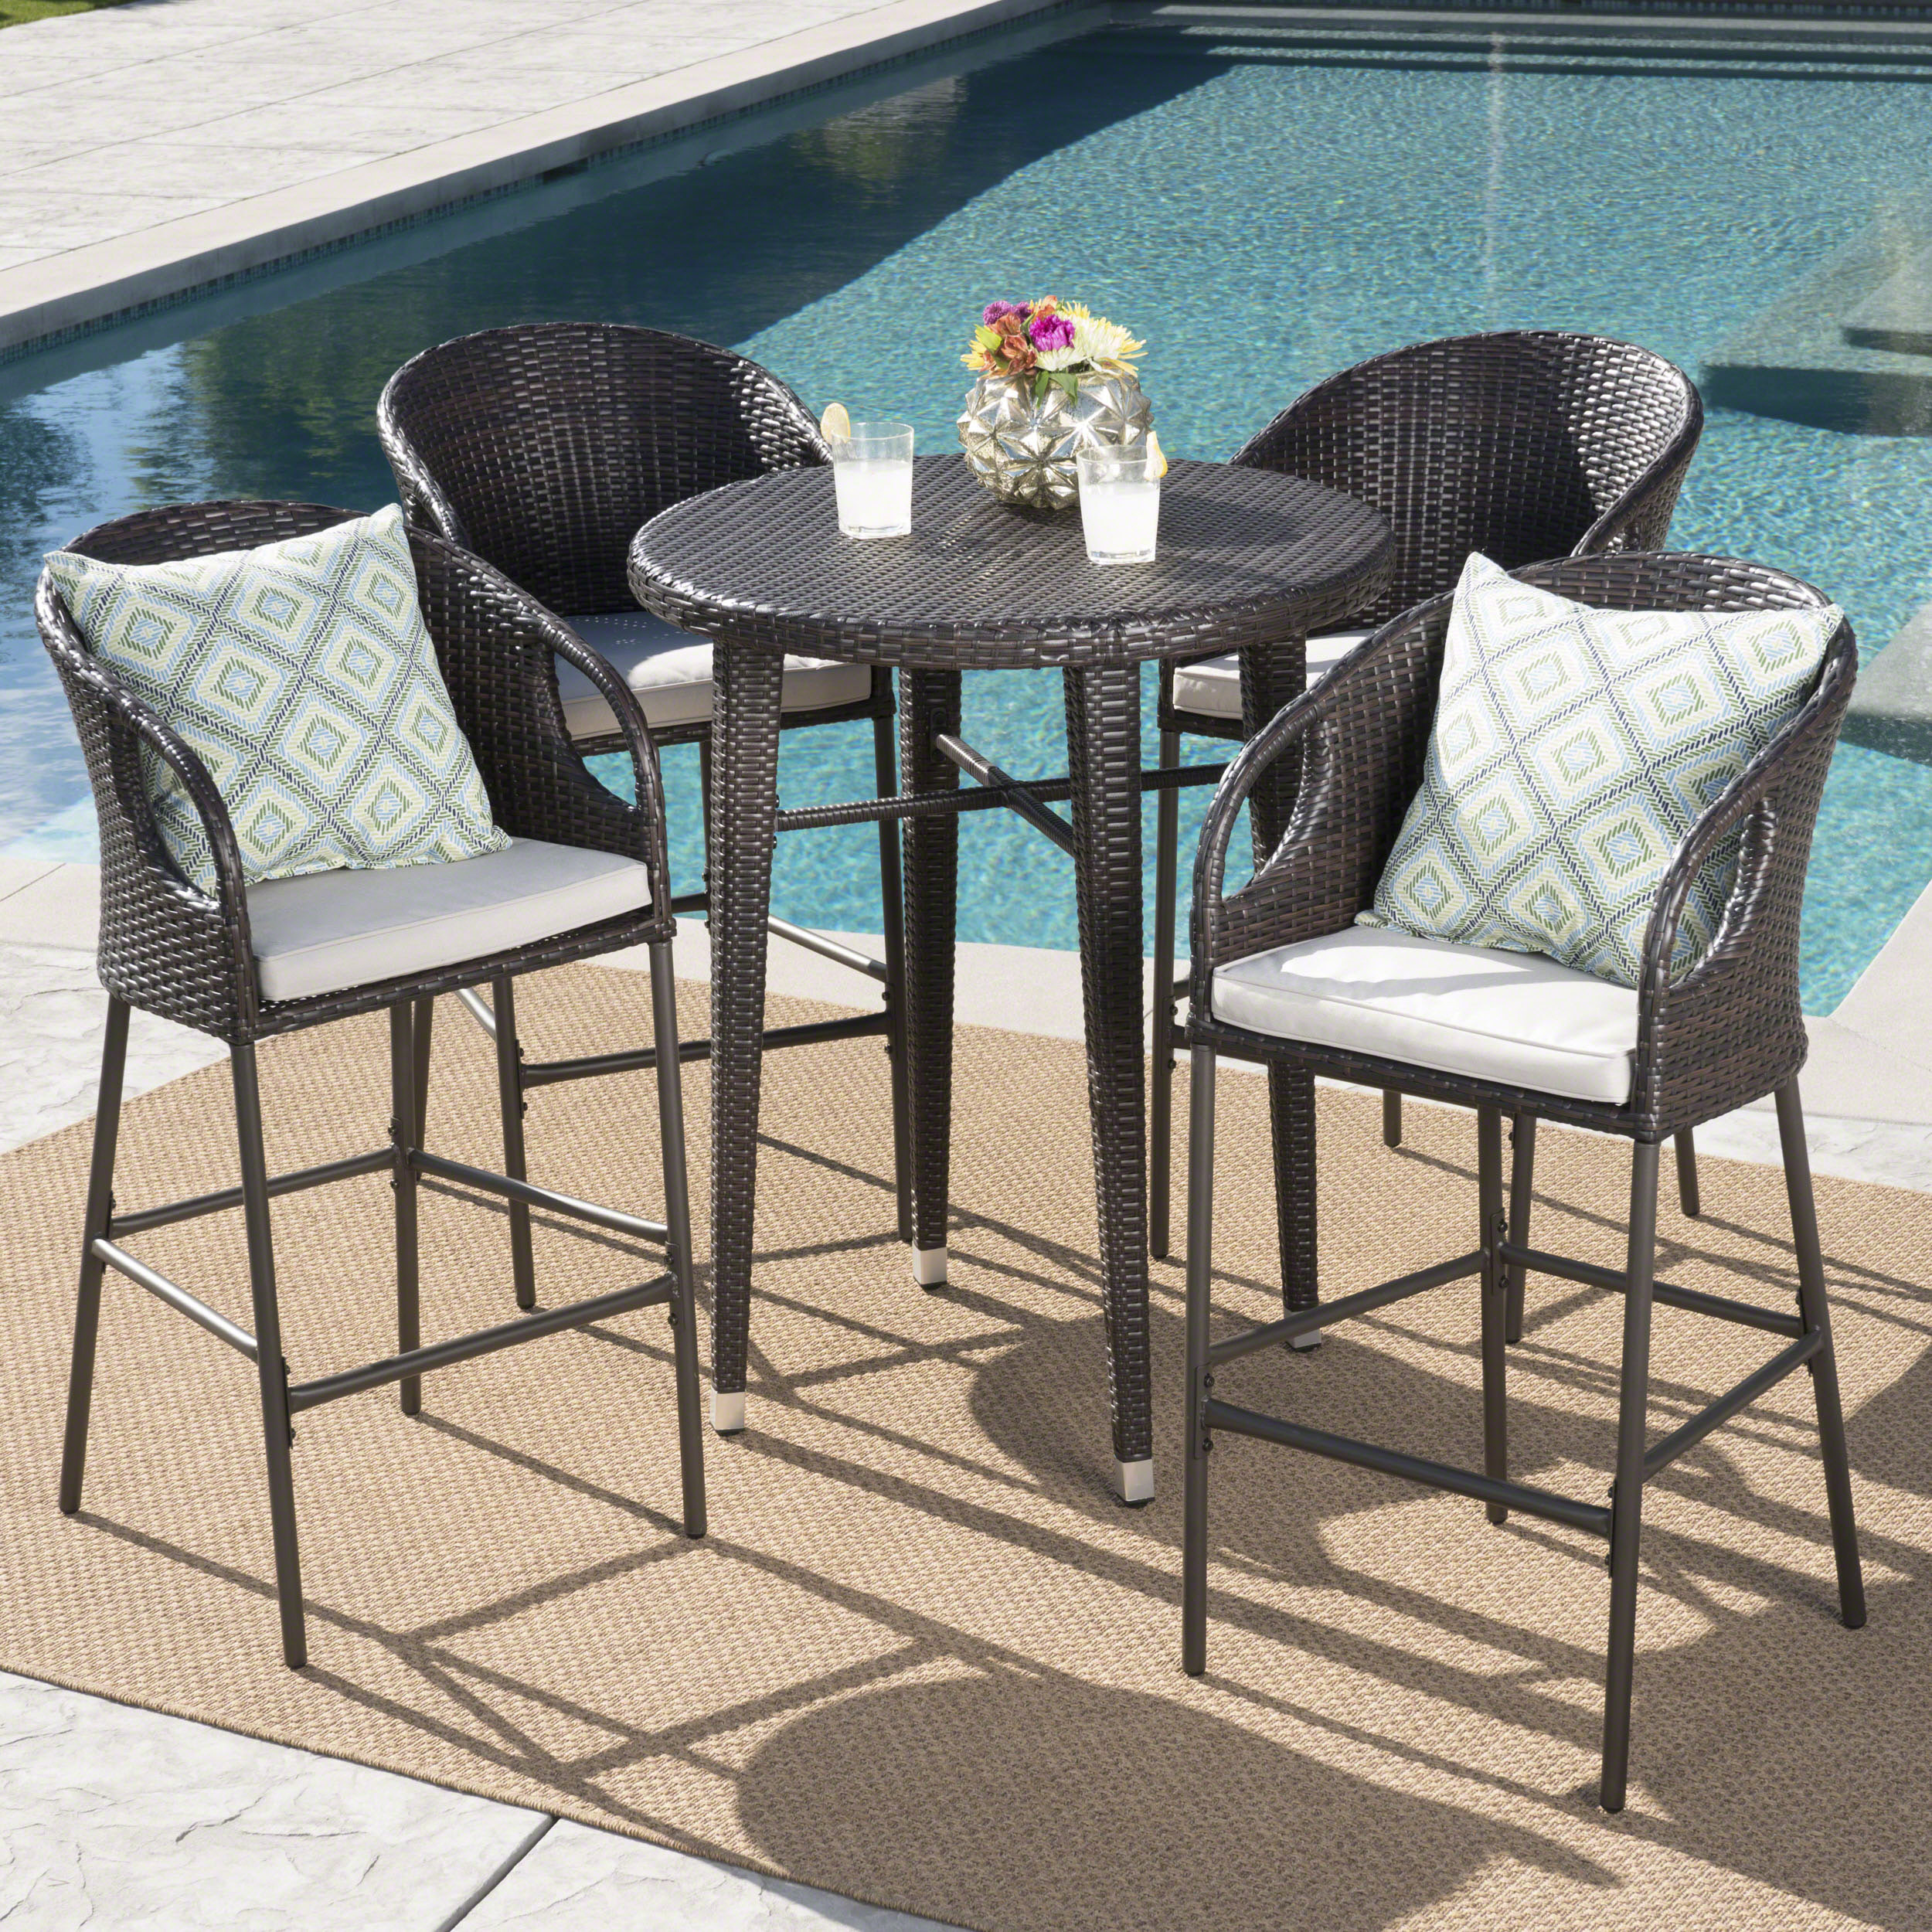 GDF Studio Breakwater Outdoor Wicker 5 Piece Bar Set with Cushion, Multibrown and Light Brown - image 2 of 13